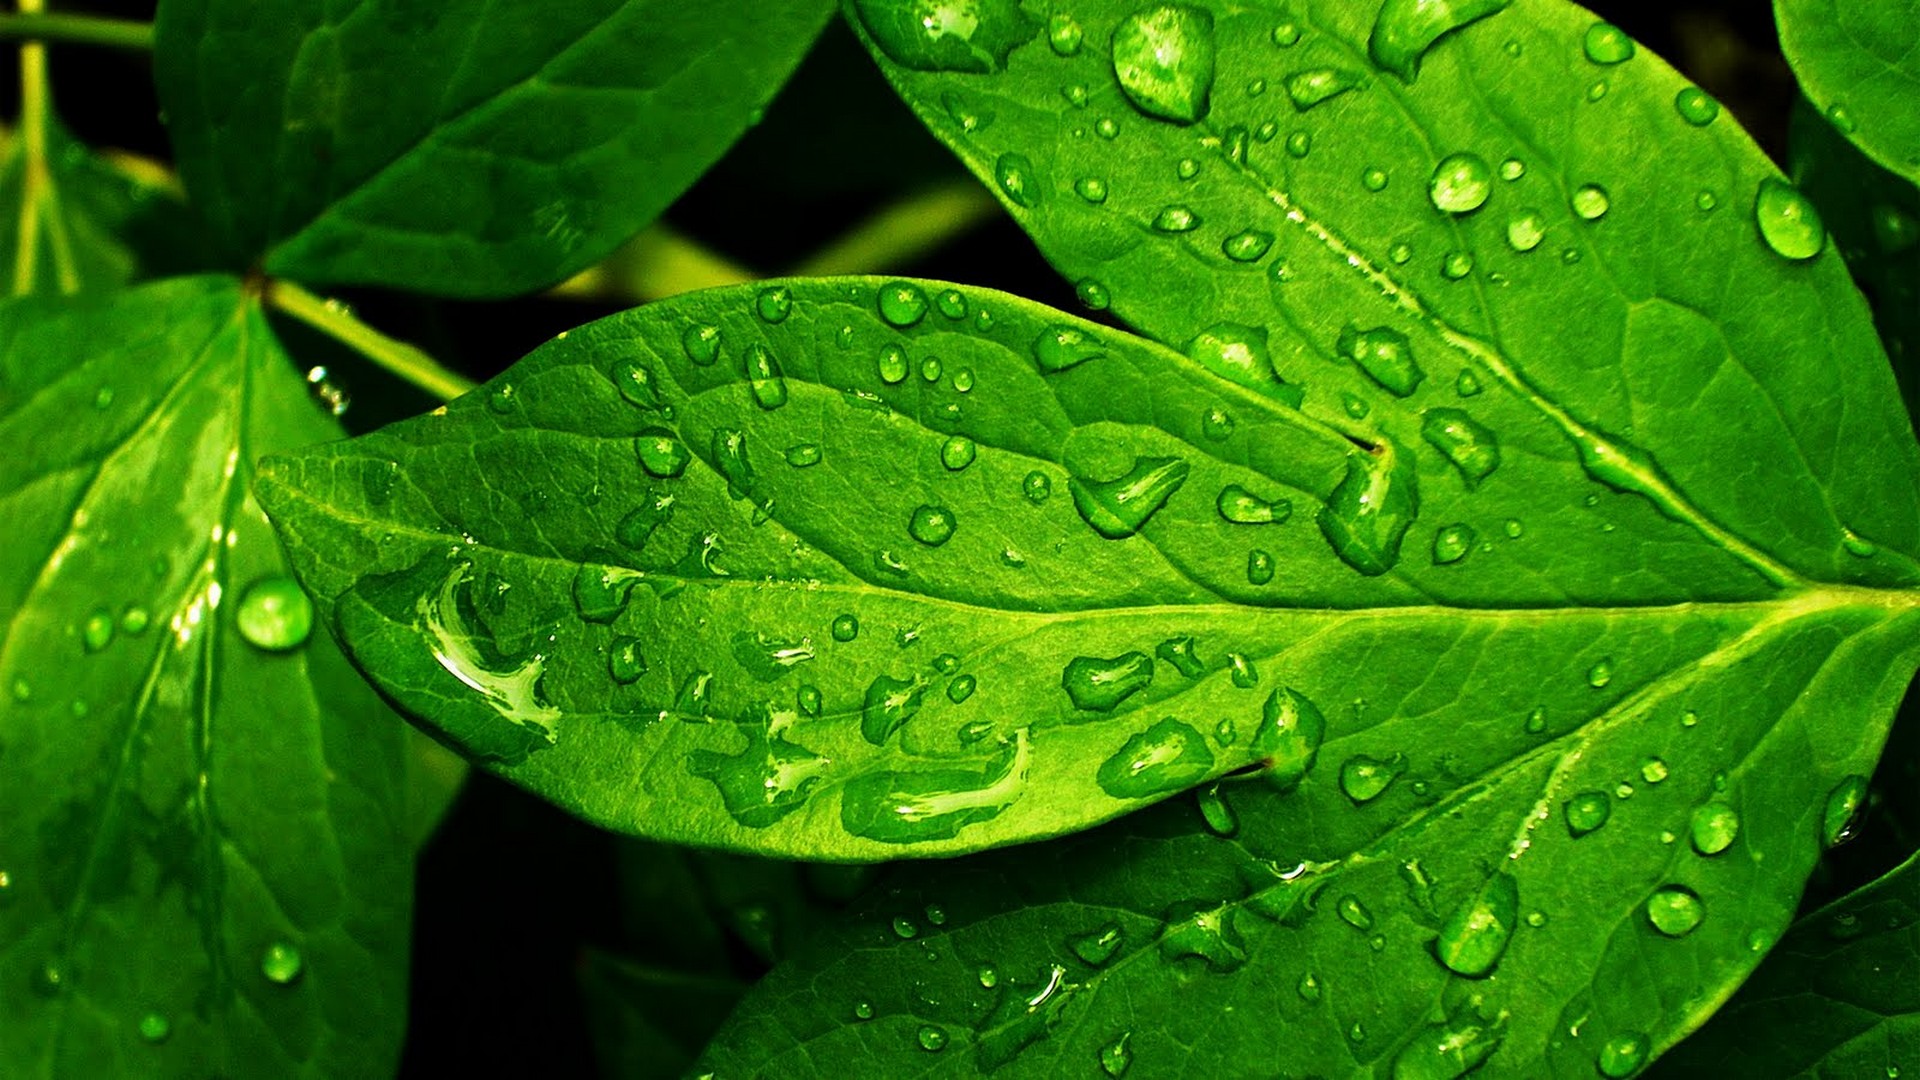 Green Leaf Background Wallpaper HD With Resolution 1920X1080 pixel. You can make this wallpaper for your Desktop Computer Backgrounds, Mac Wallpapers, Android Lock screen or iPhone Screensavers